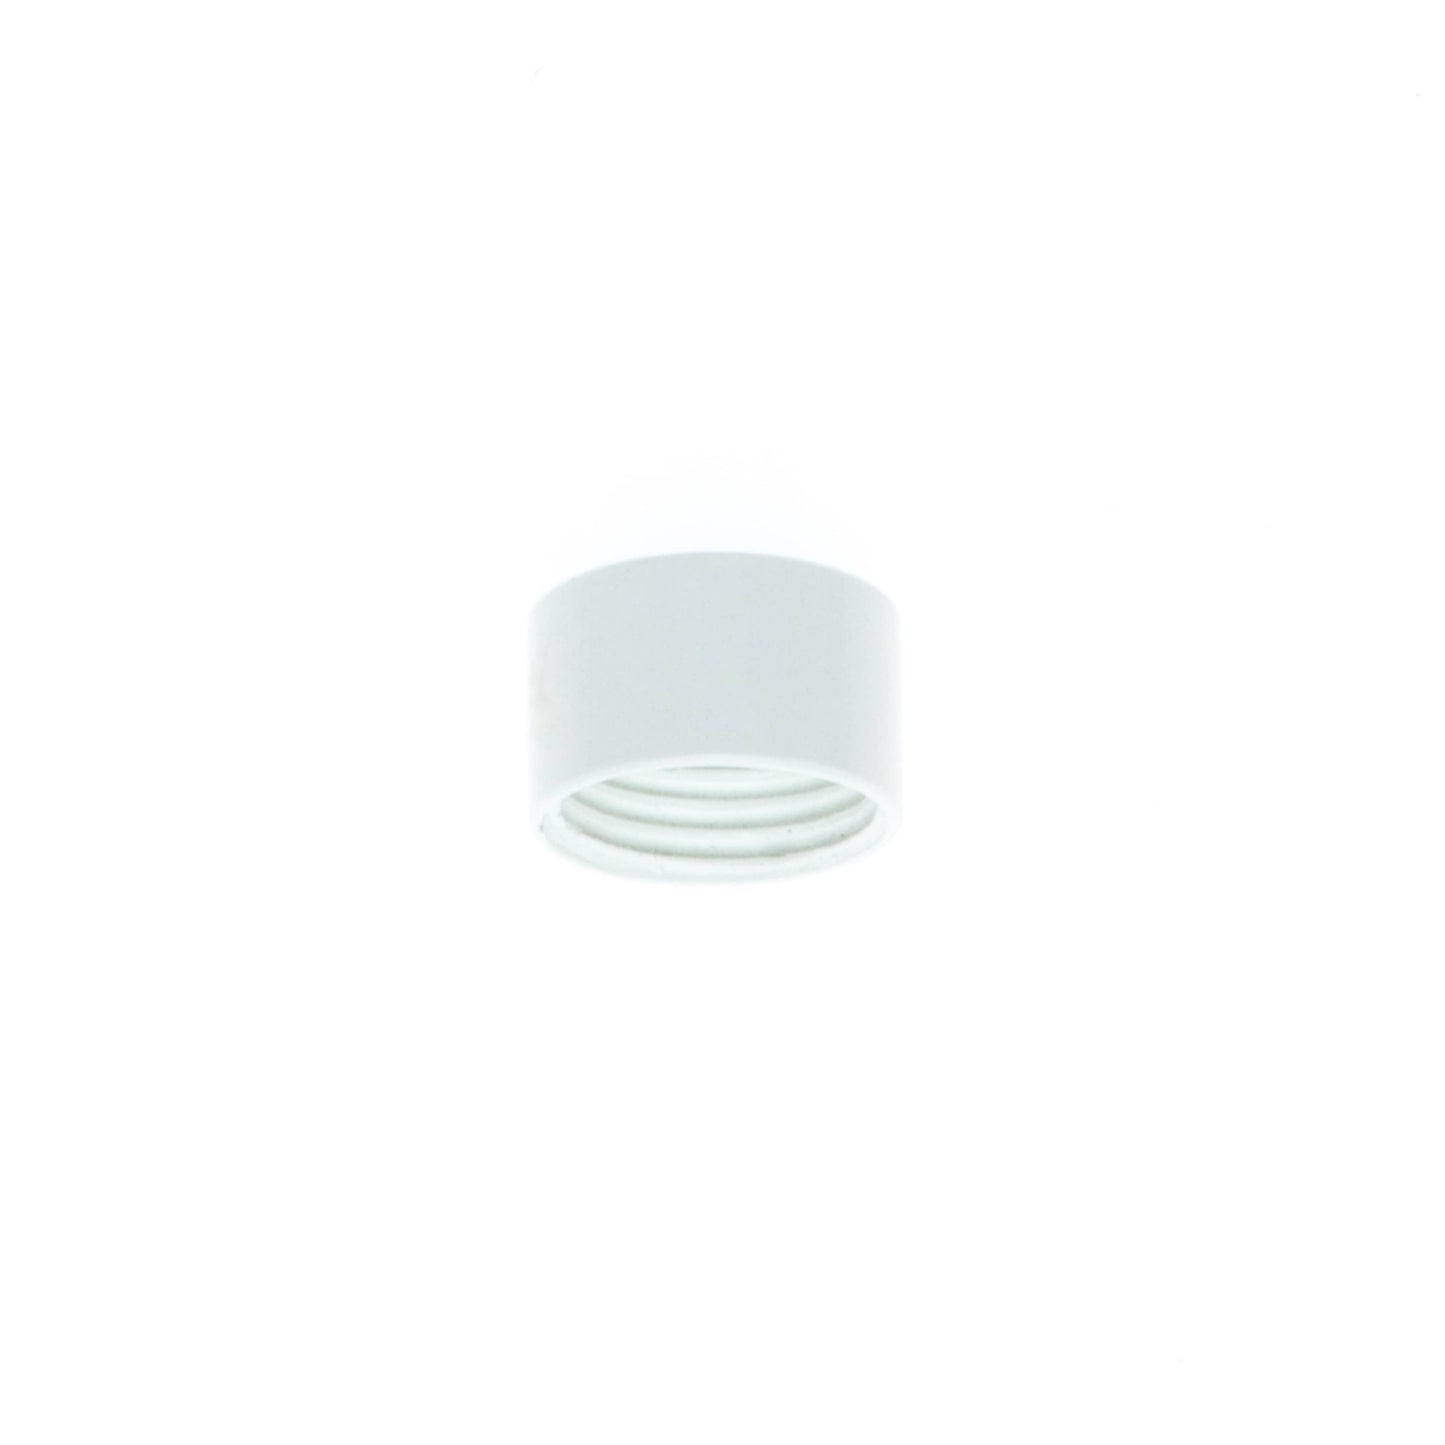 1/8 IPS Tubing/Pipe Thread Cover